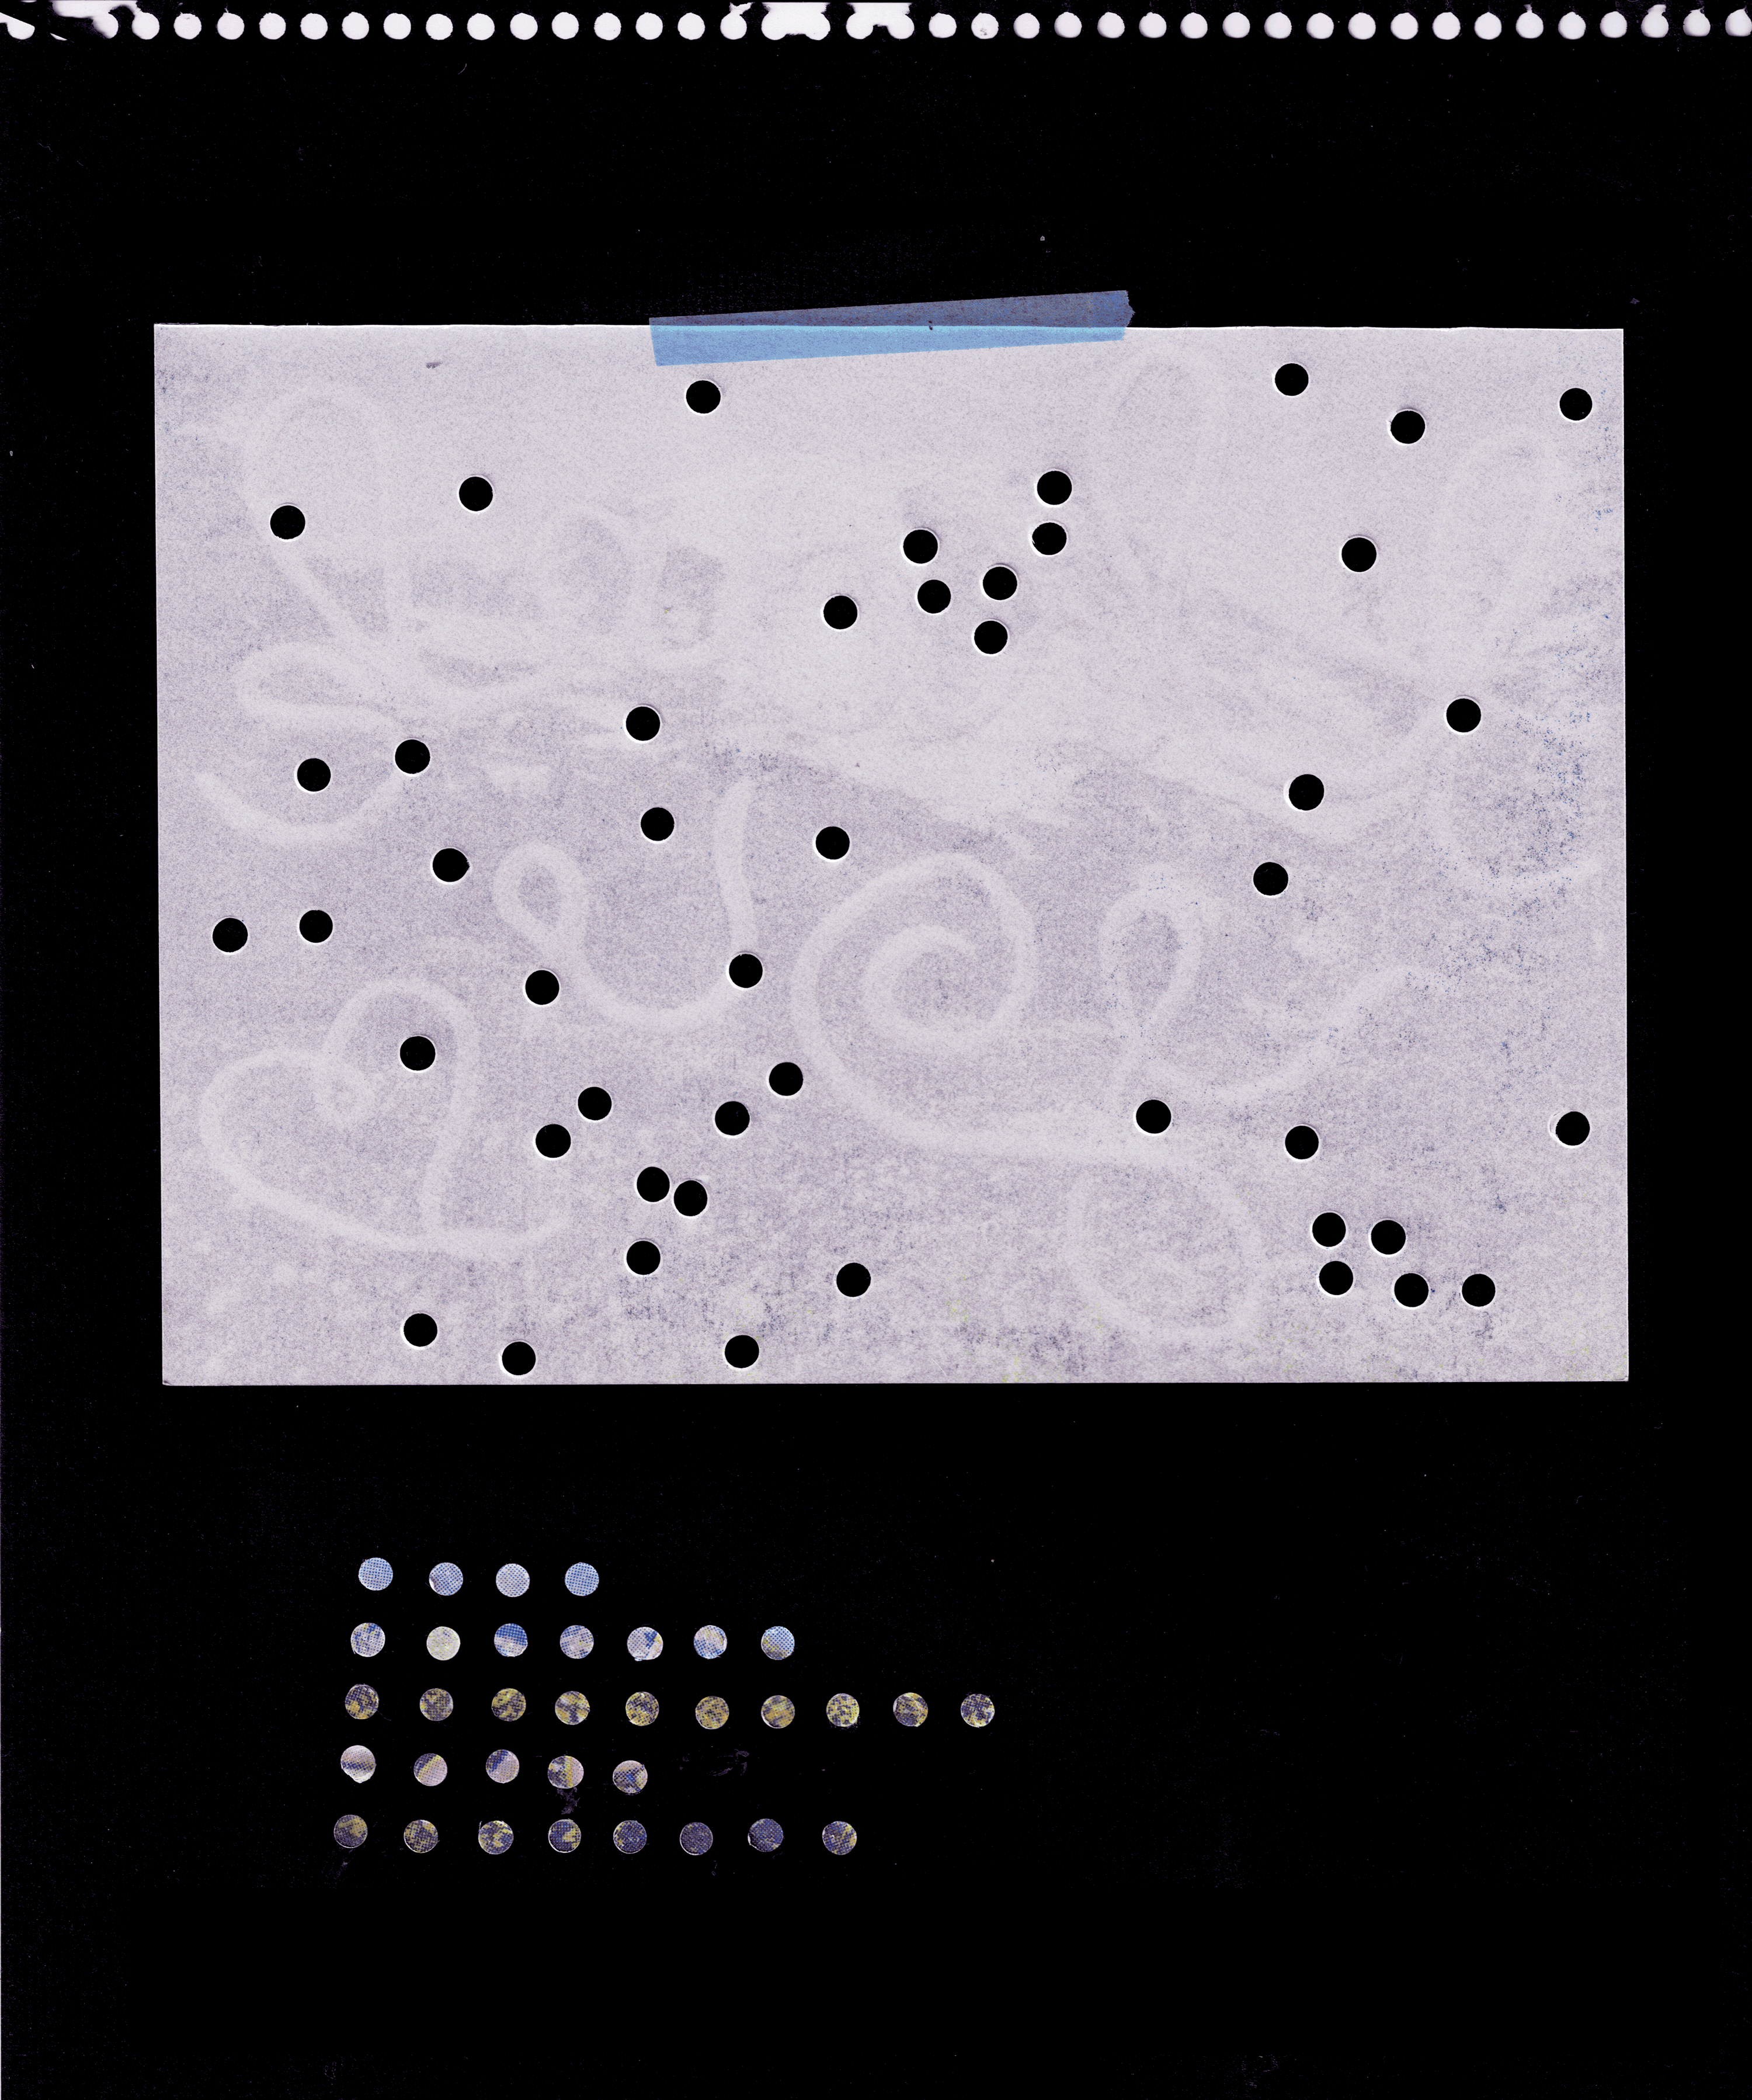 punchcard-animation-final.gif